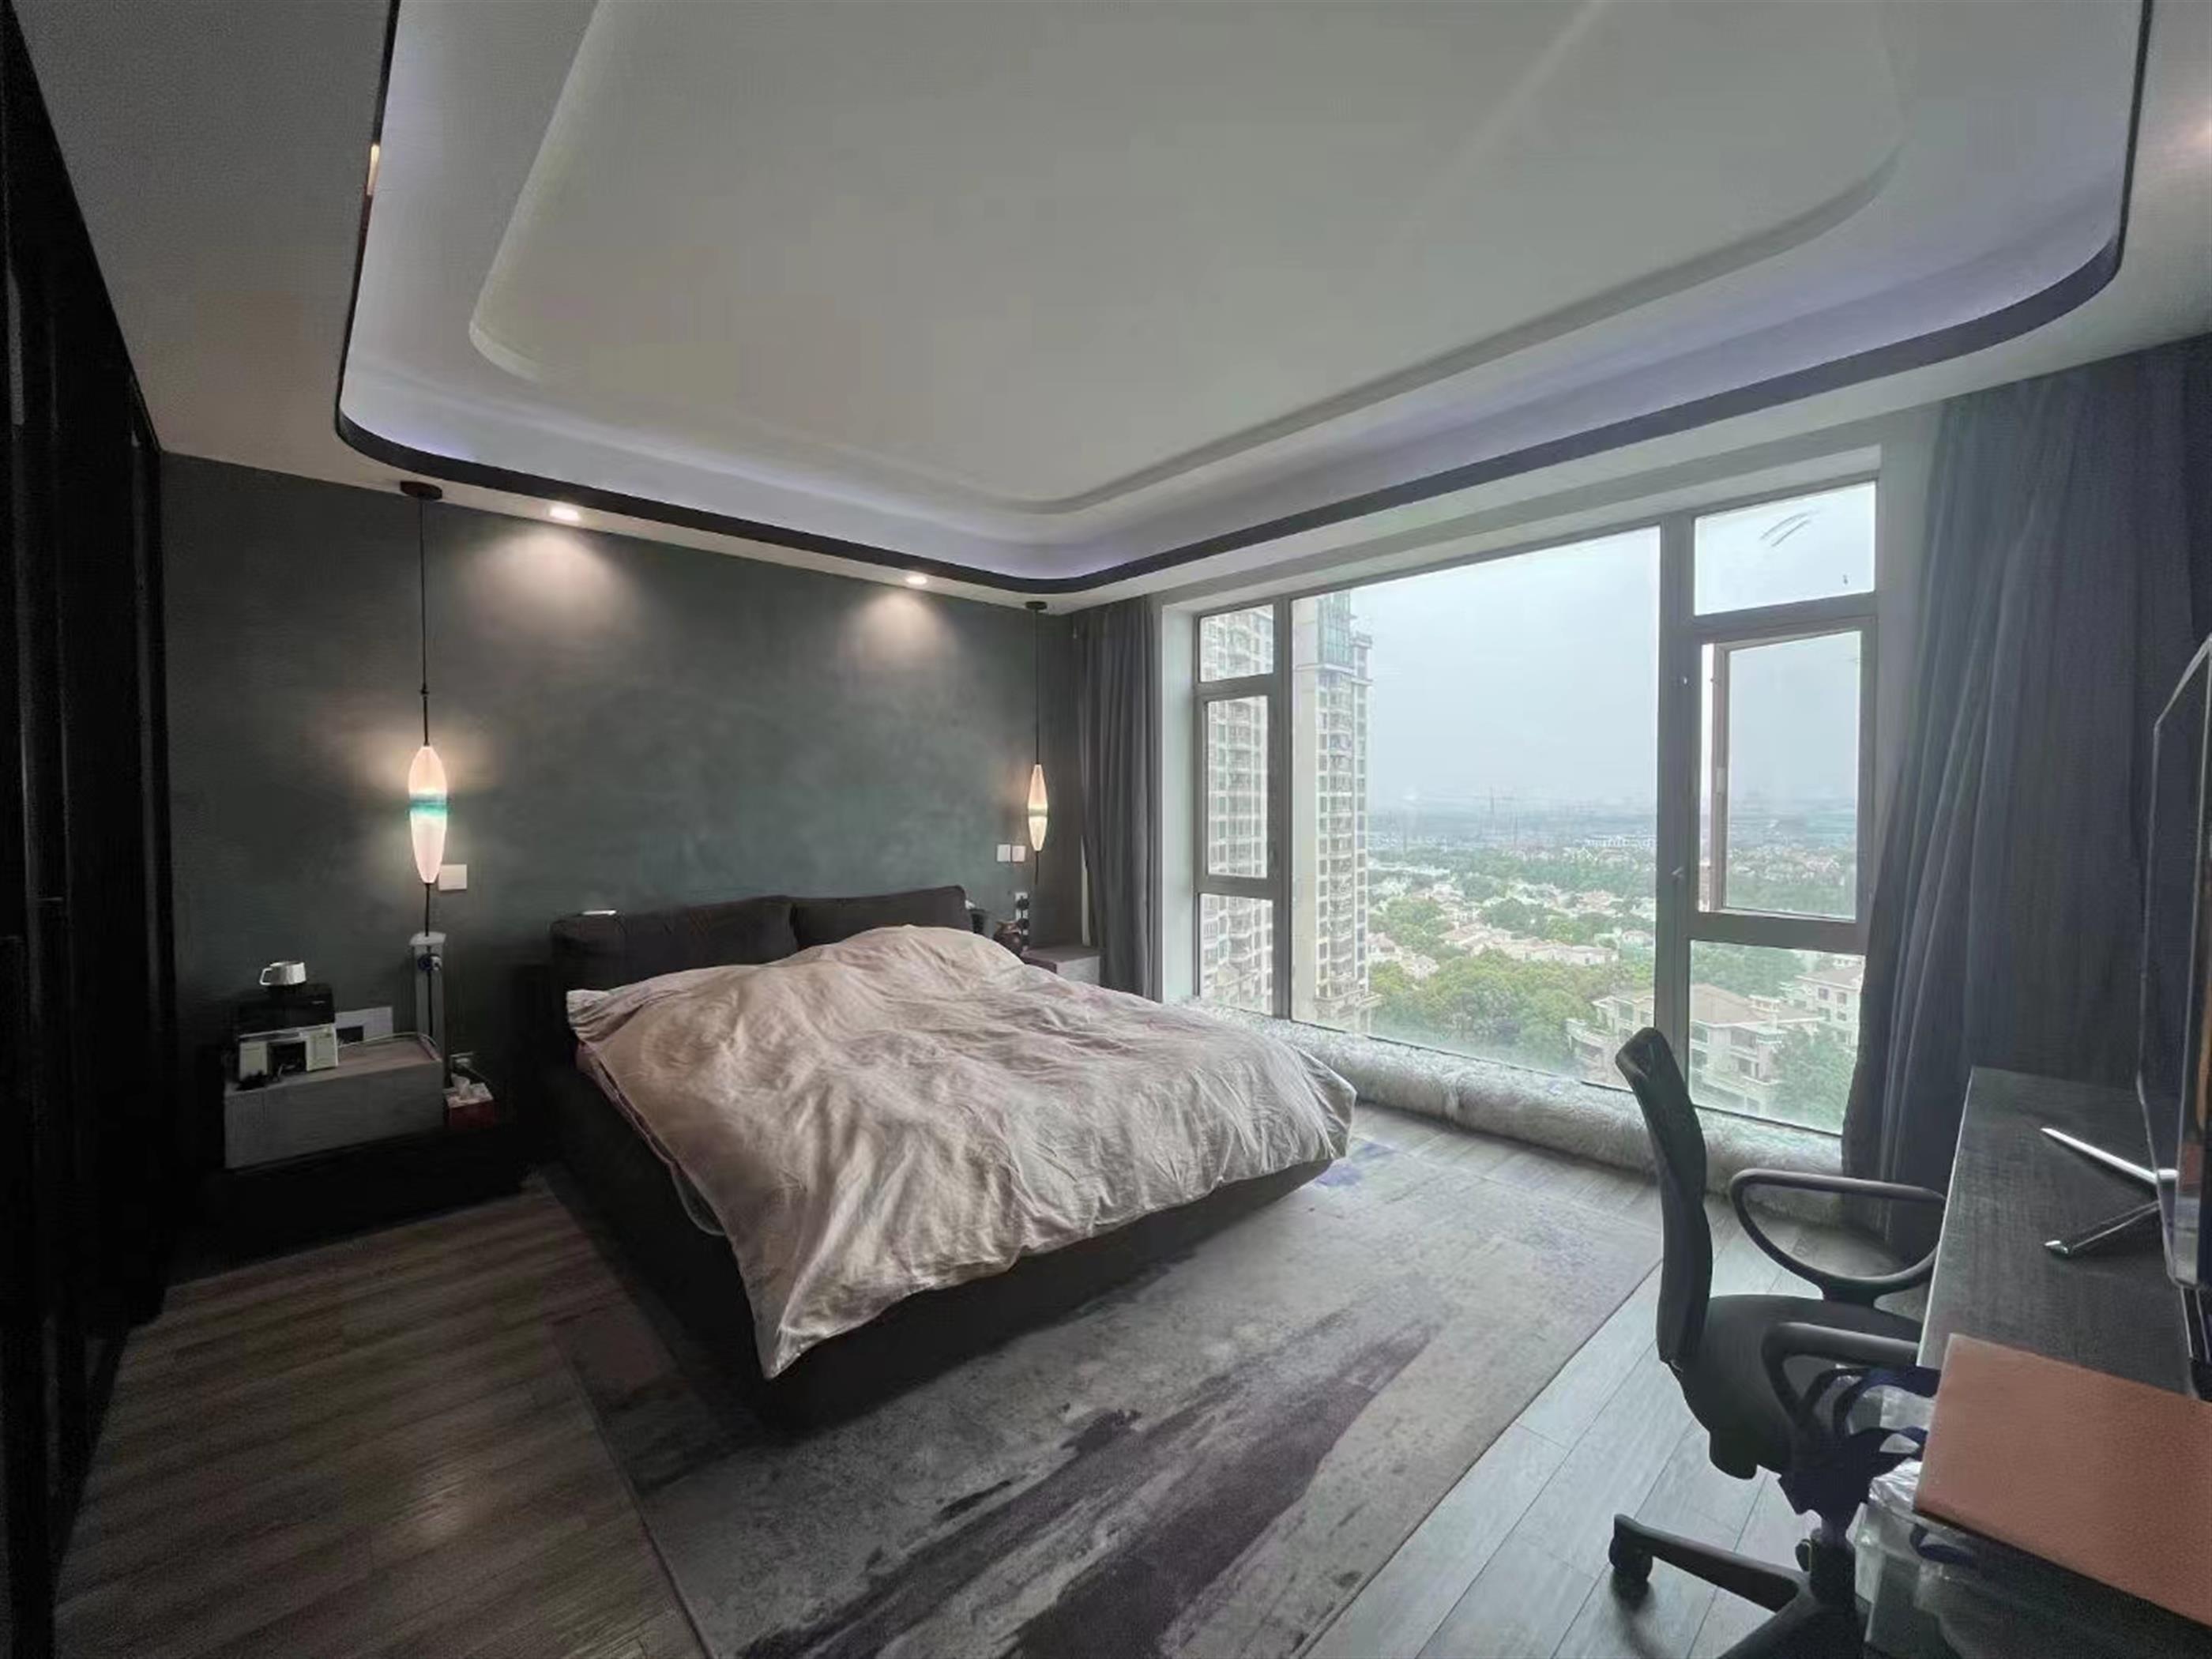 Master Bedroom Classic Spacious Chic 3BR Apartment for Rent in Shanghai’s Jing’an Temple Neighborhood